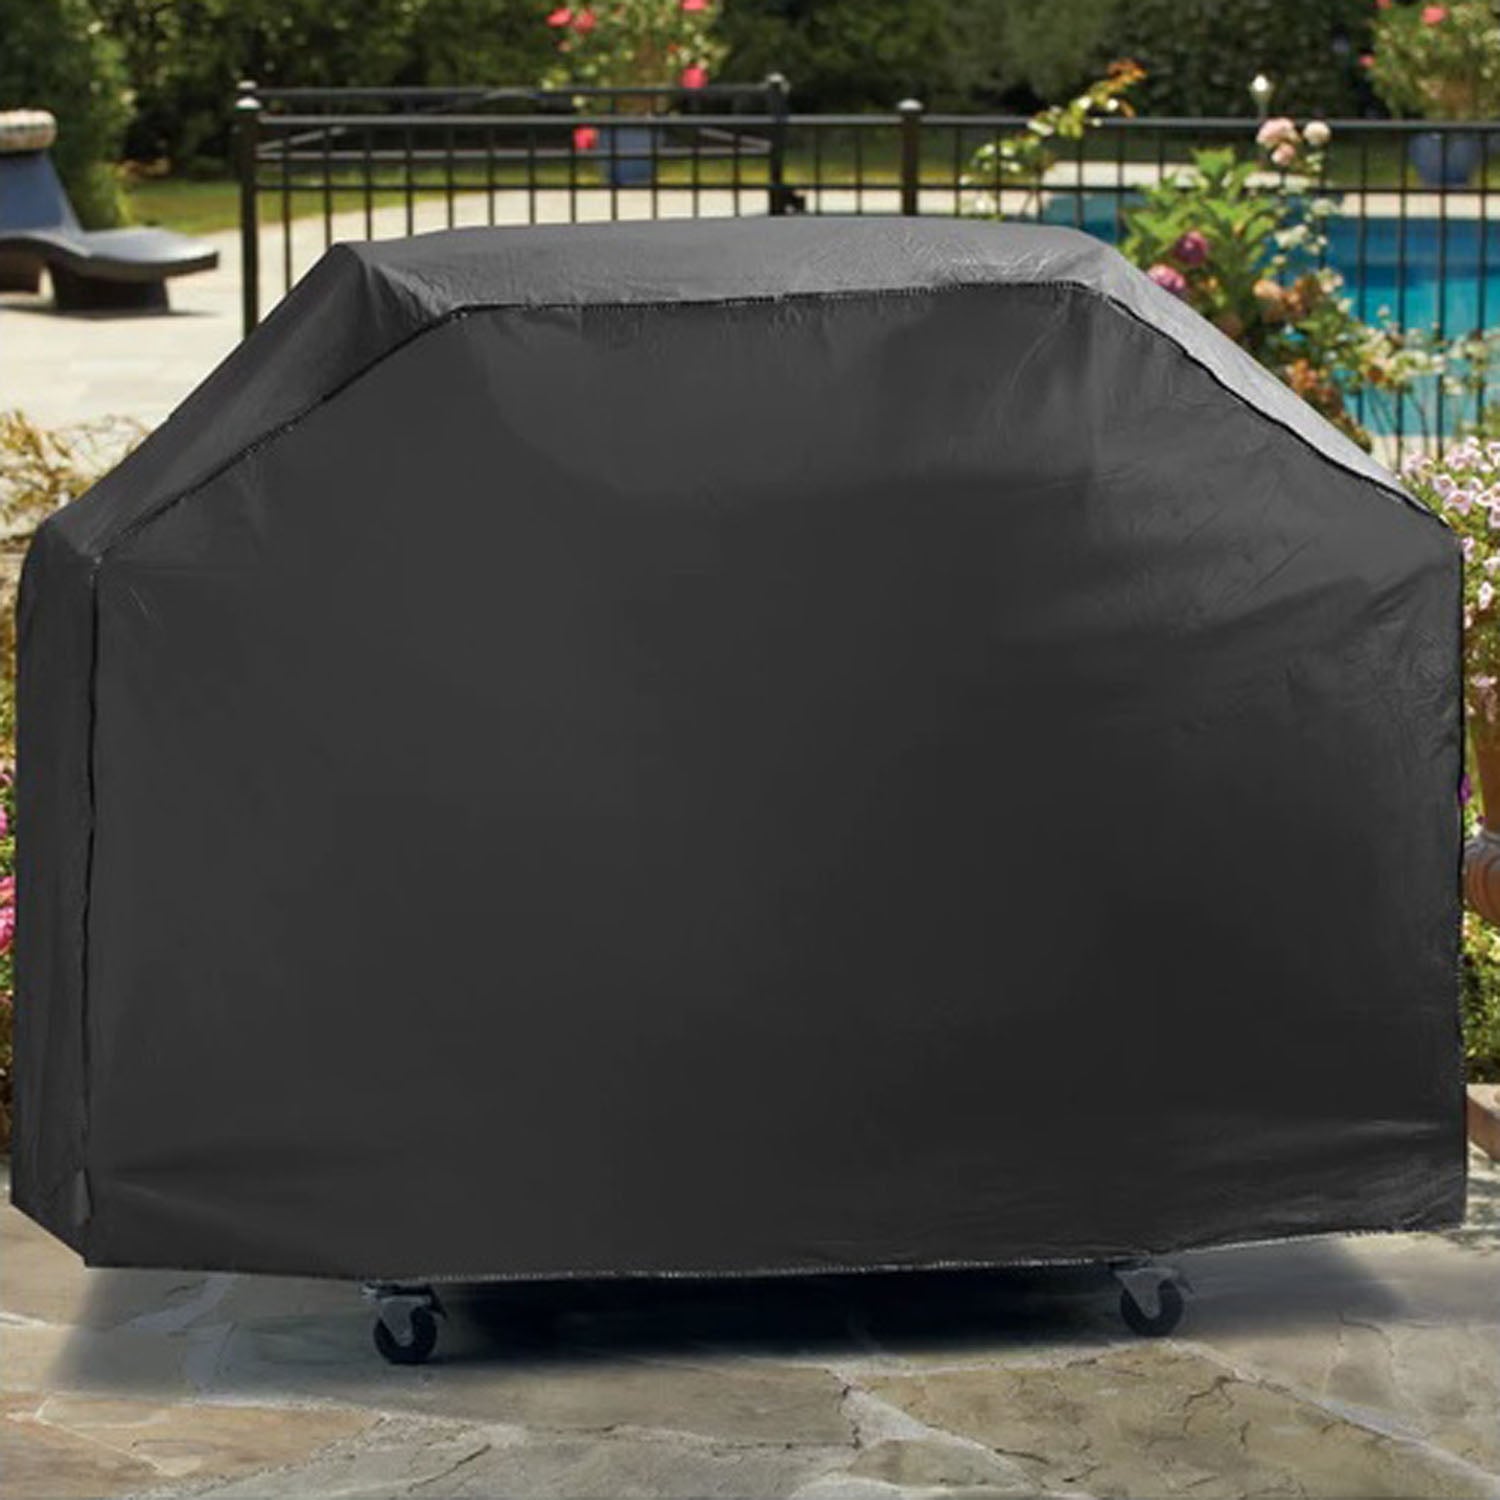 Universal Fit X-Large Grill Cover Durable Weather Resistant 60x20x45" Black